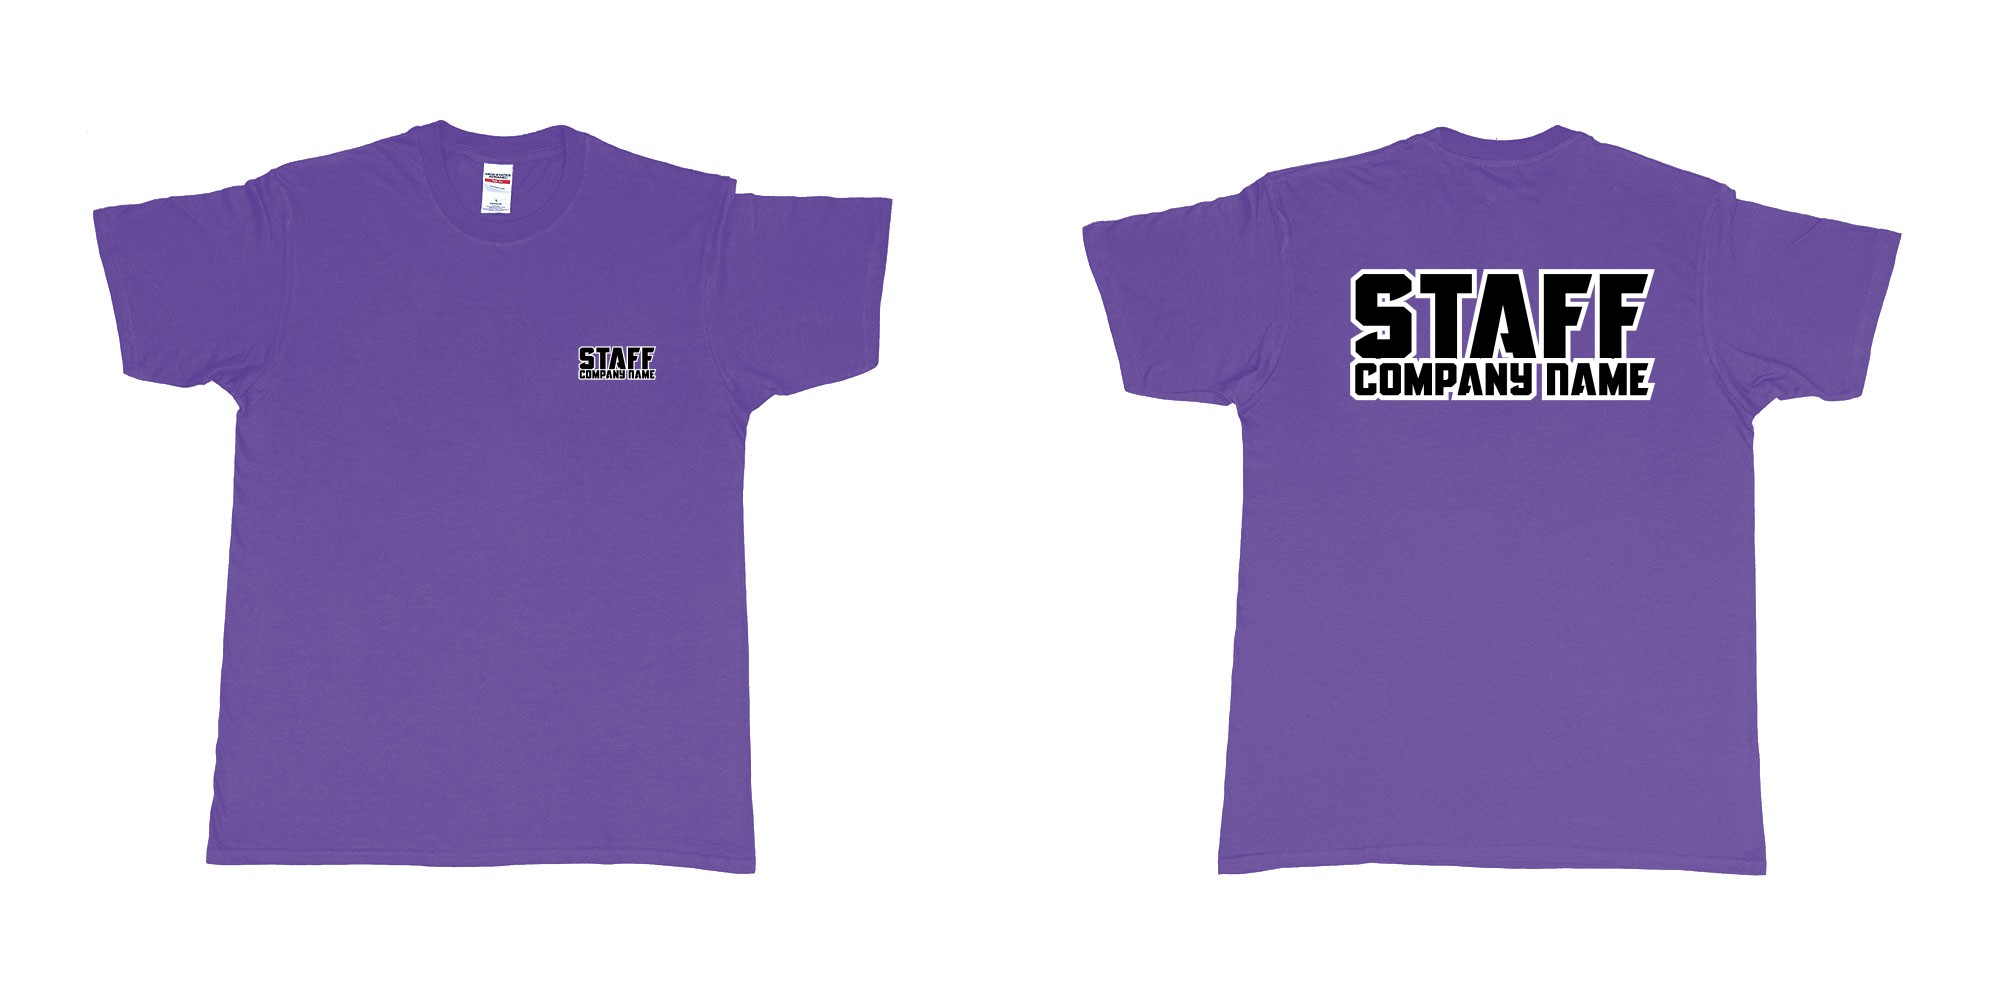 Custom tshirt design staff tshirt own company name in fabric color purple choice your own text made in Bali by The Pirate Way